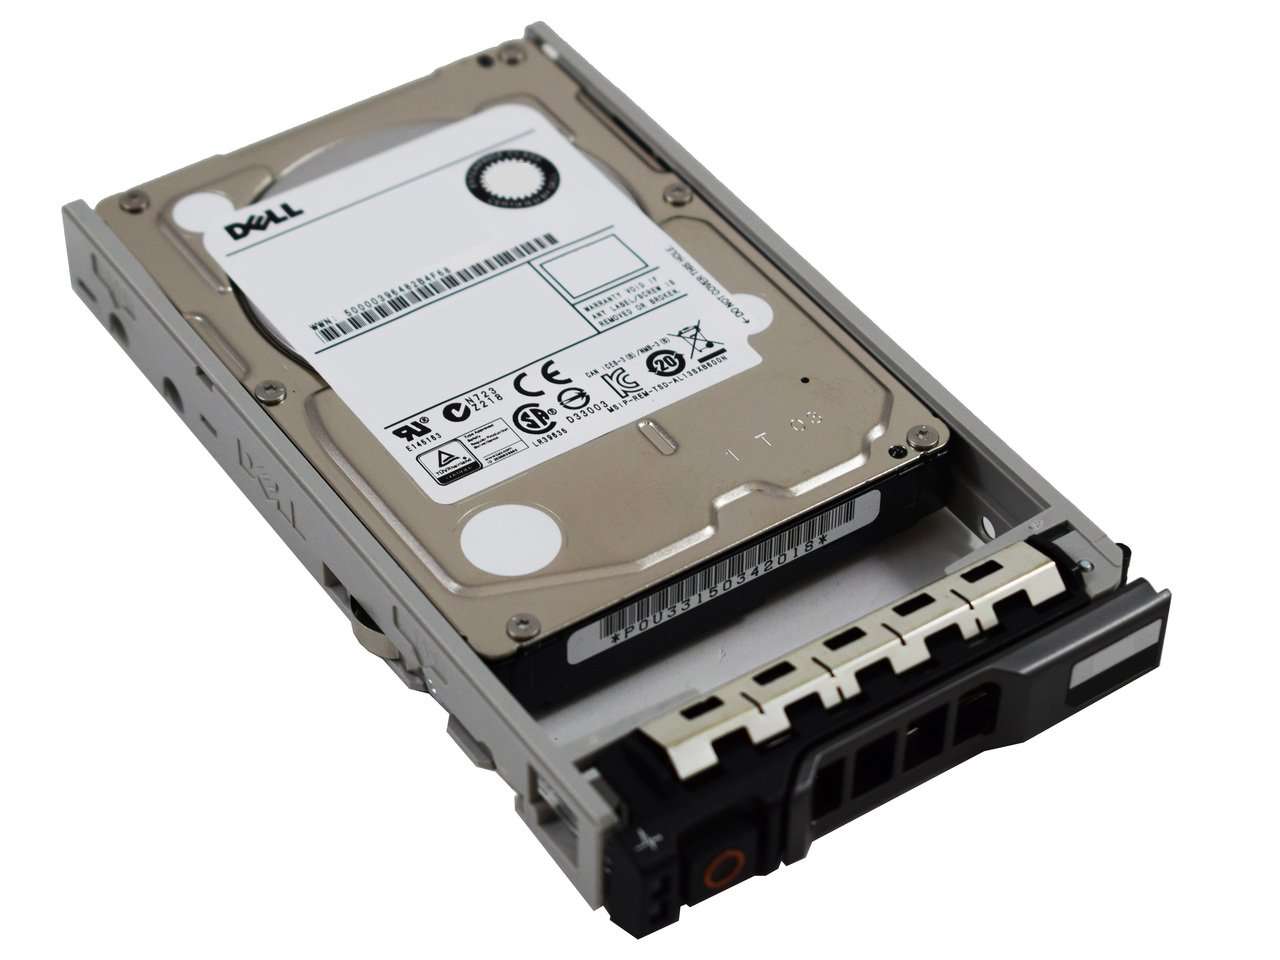 Dell G13 400-ADPC 600GB 15K RPM SAS 6Gb/s 512n 2.5" Manufacturer Recertified HDD